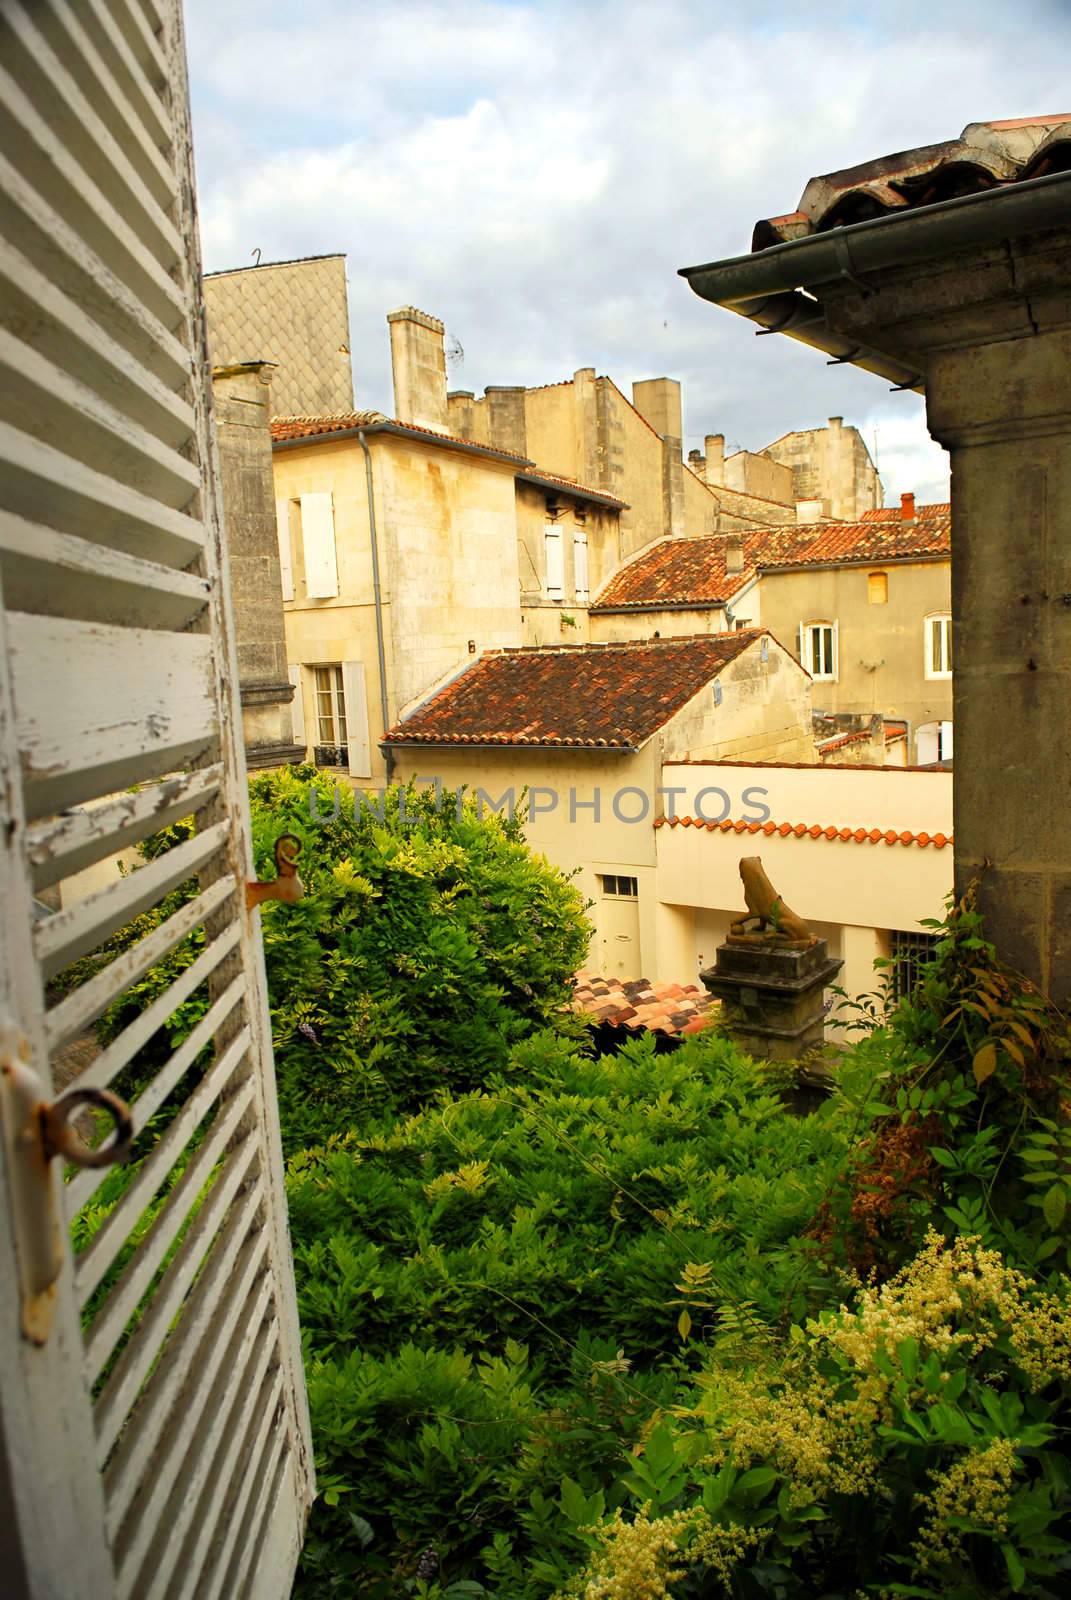 View from an open window with shutters in town of Cognac, France